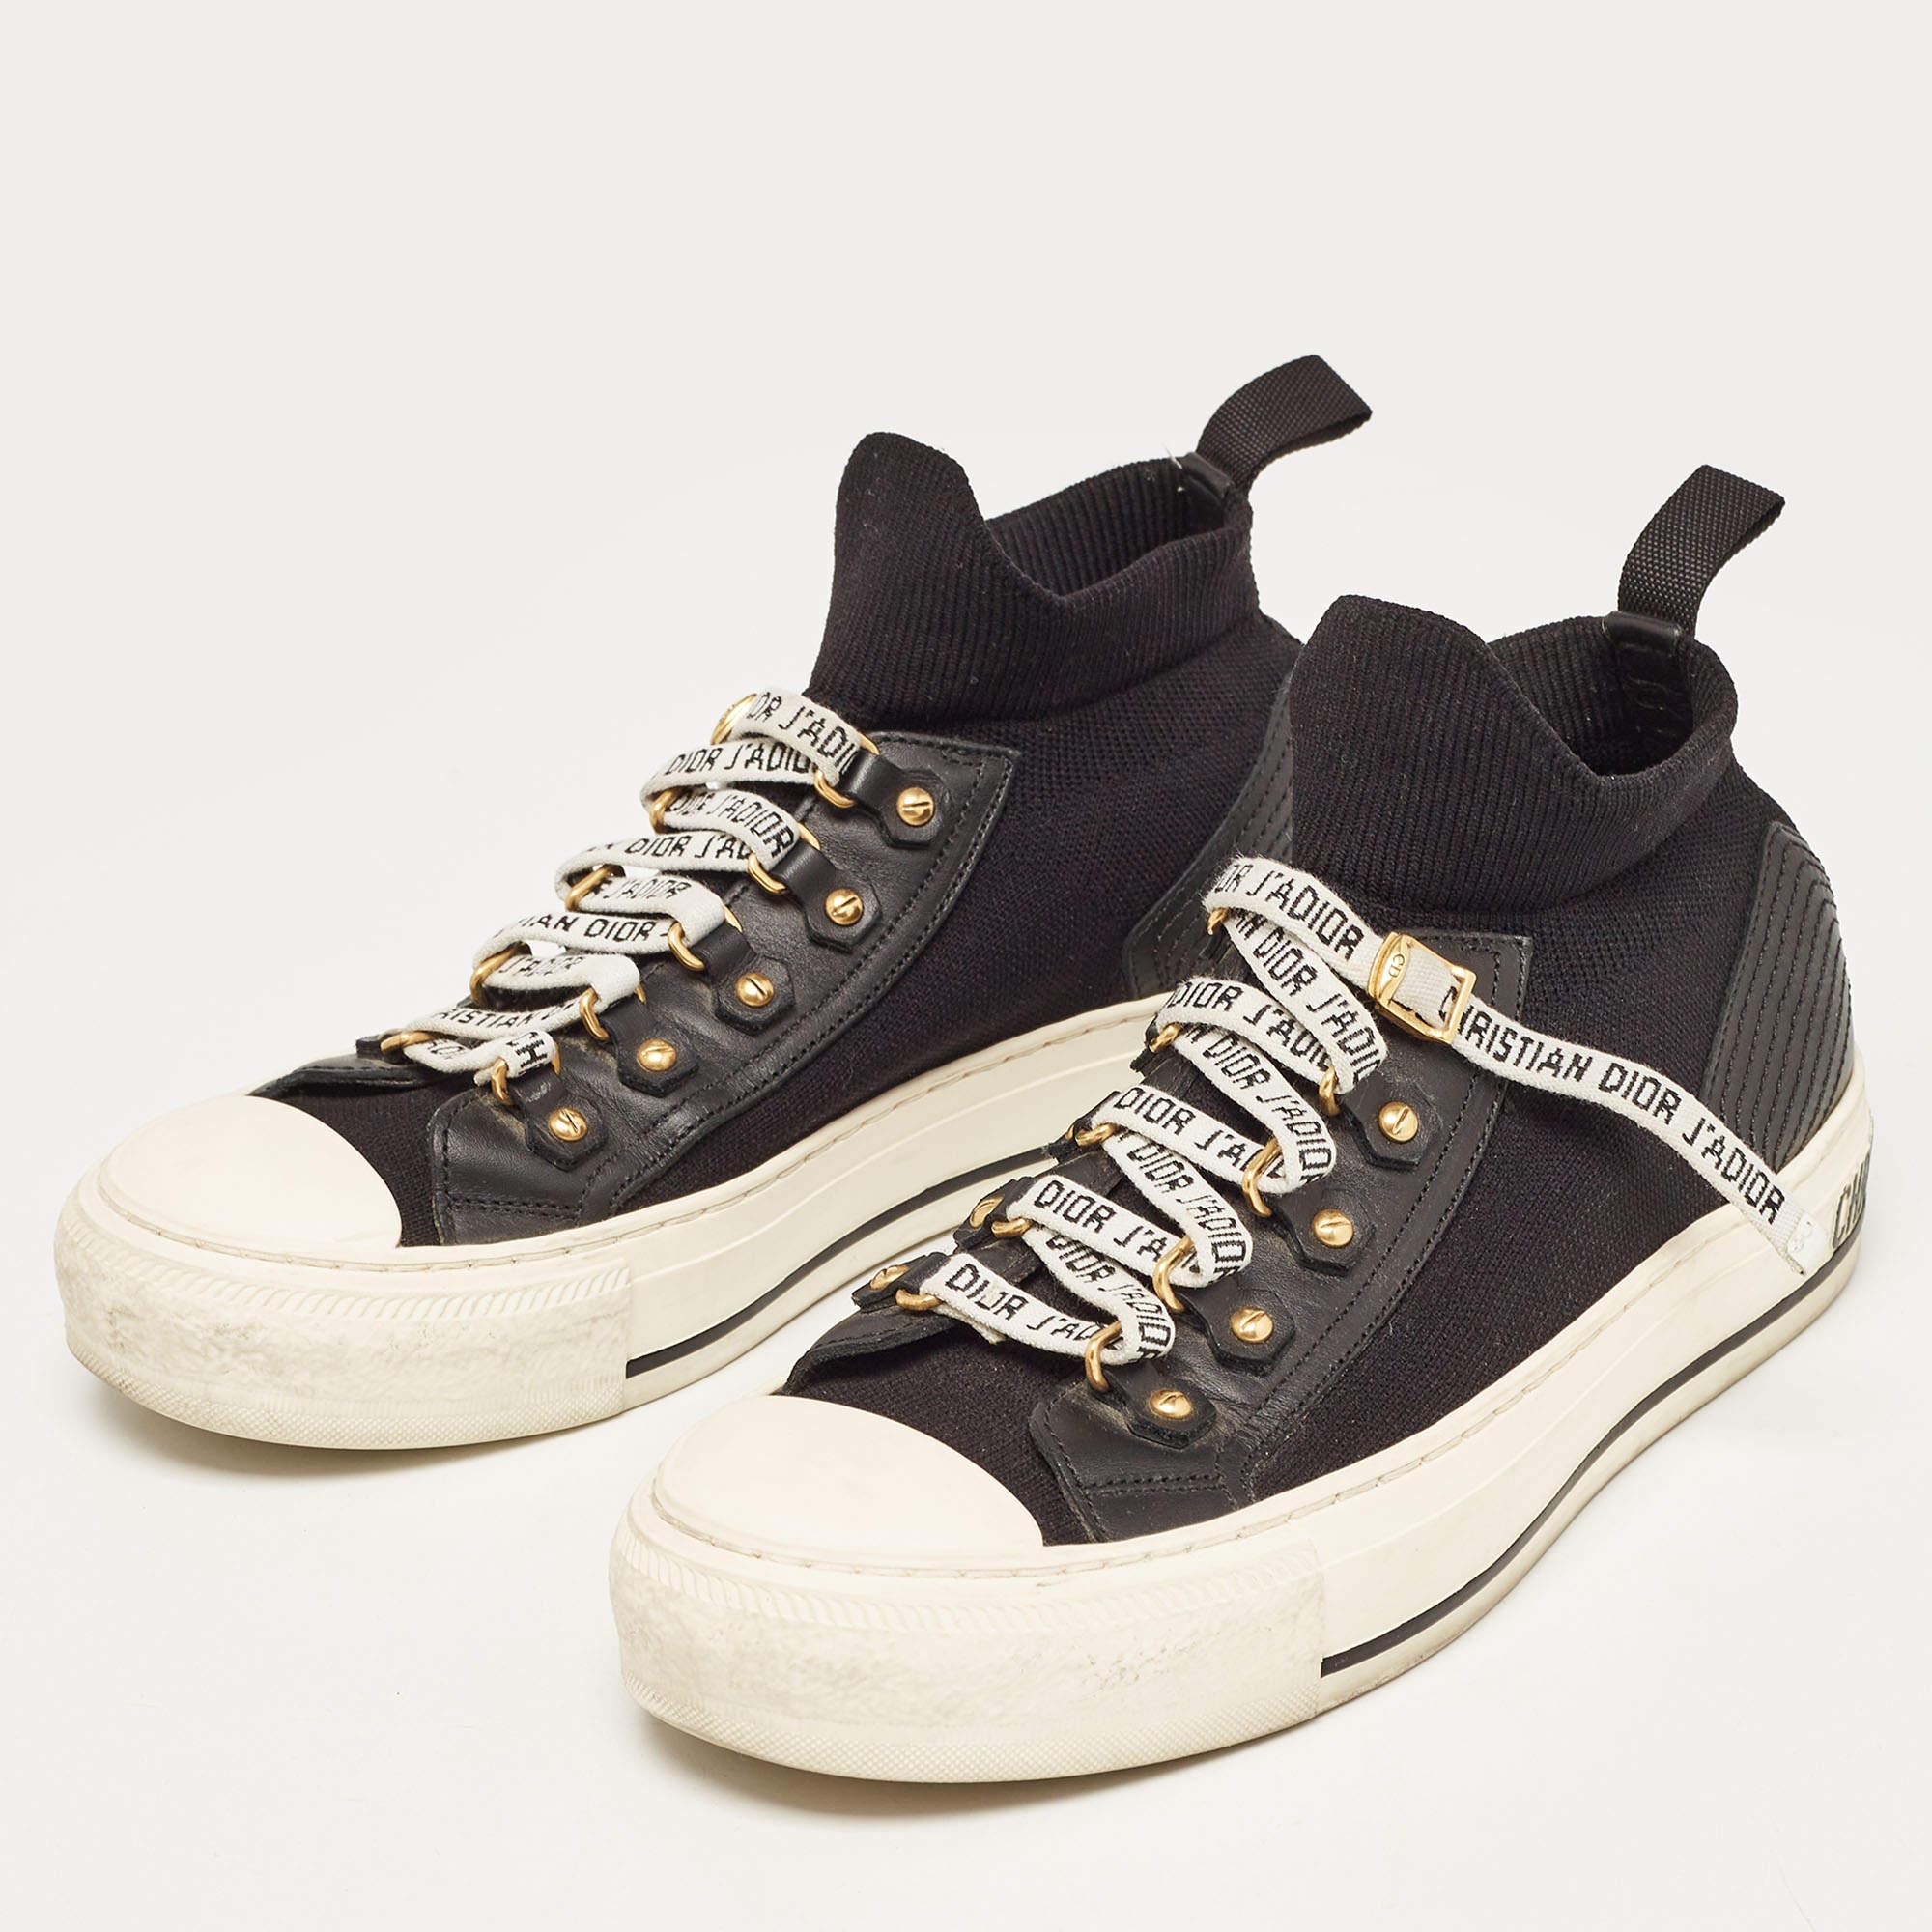 Dior Black Fabric and Leather Walk'n'Dior High Top Sneakers Size 36 For Sale 2